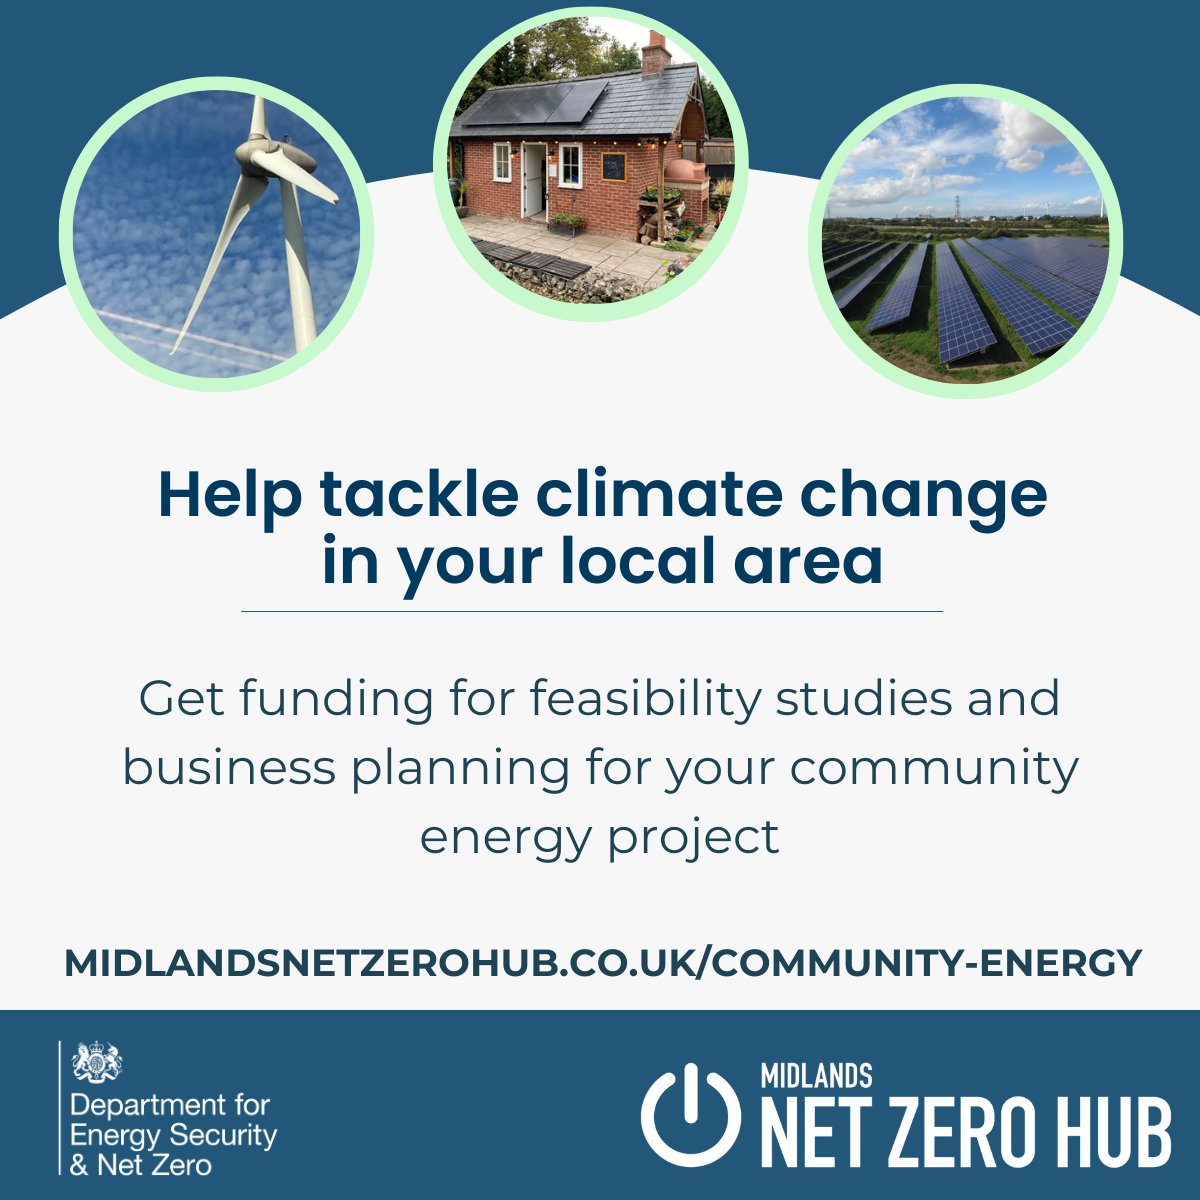 Funding is now available from the #CommunityEnergyFund to explore an energy project in your community. @MidsNetZeroHub is offering up to £100,000 funding to help develop ideas into investable projects. midlandsnetzerohub.co.uk/community-ener…